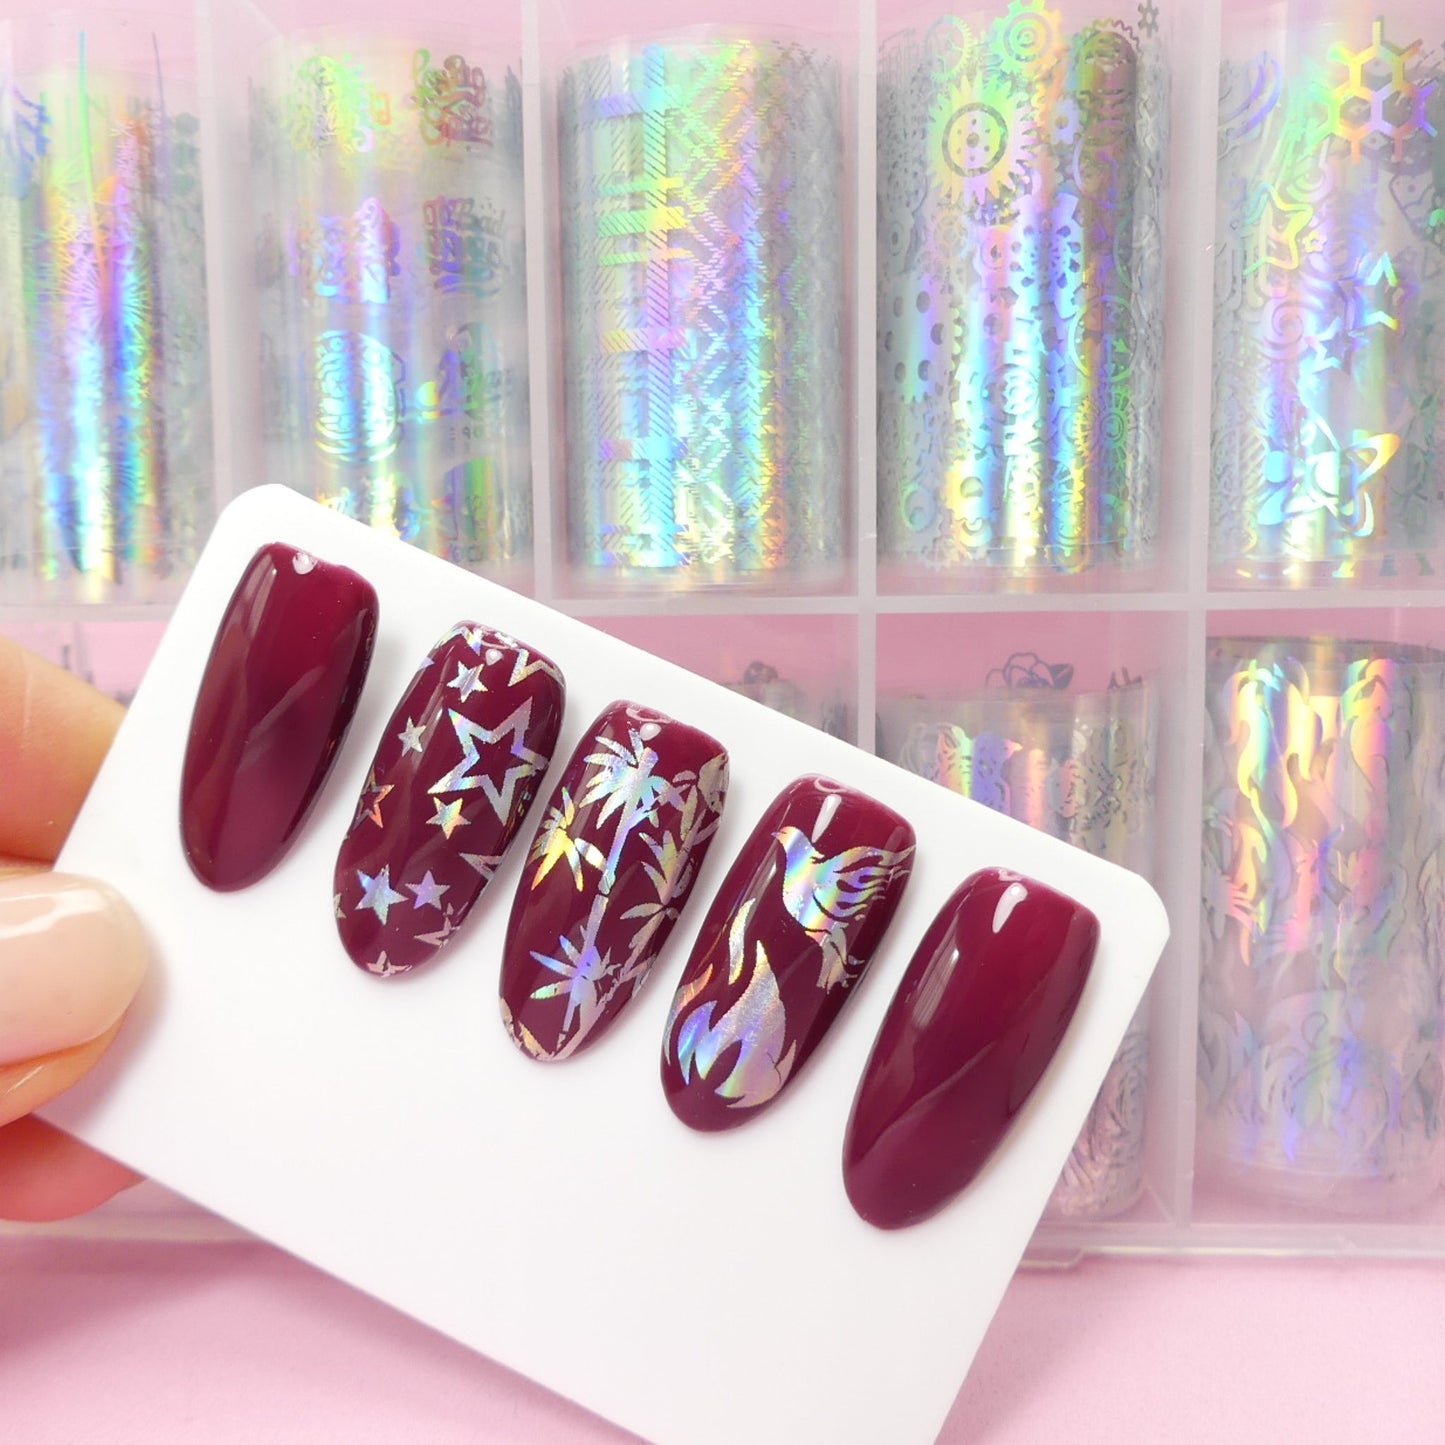 20ml Sticky Art Rhinestone Stamping Gel With UV Polish Extension And Clear  Adhesive For Jewelry Manicure From Blueberry01, $23.7